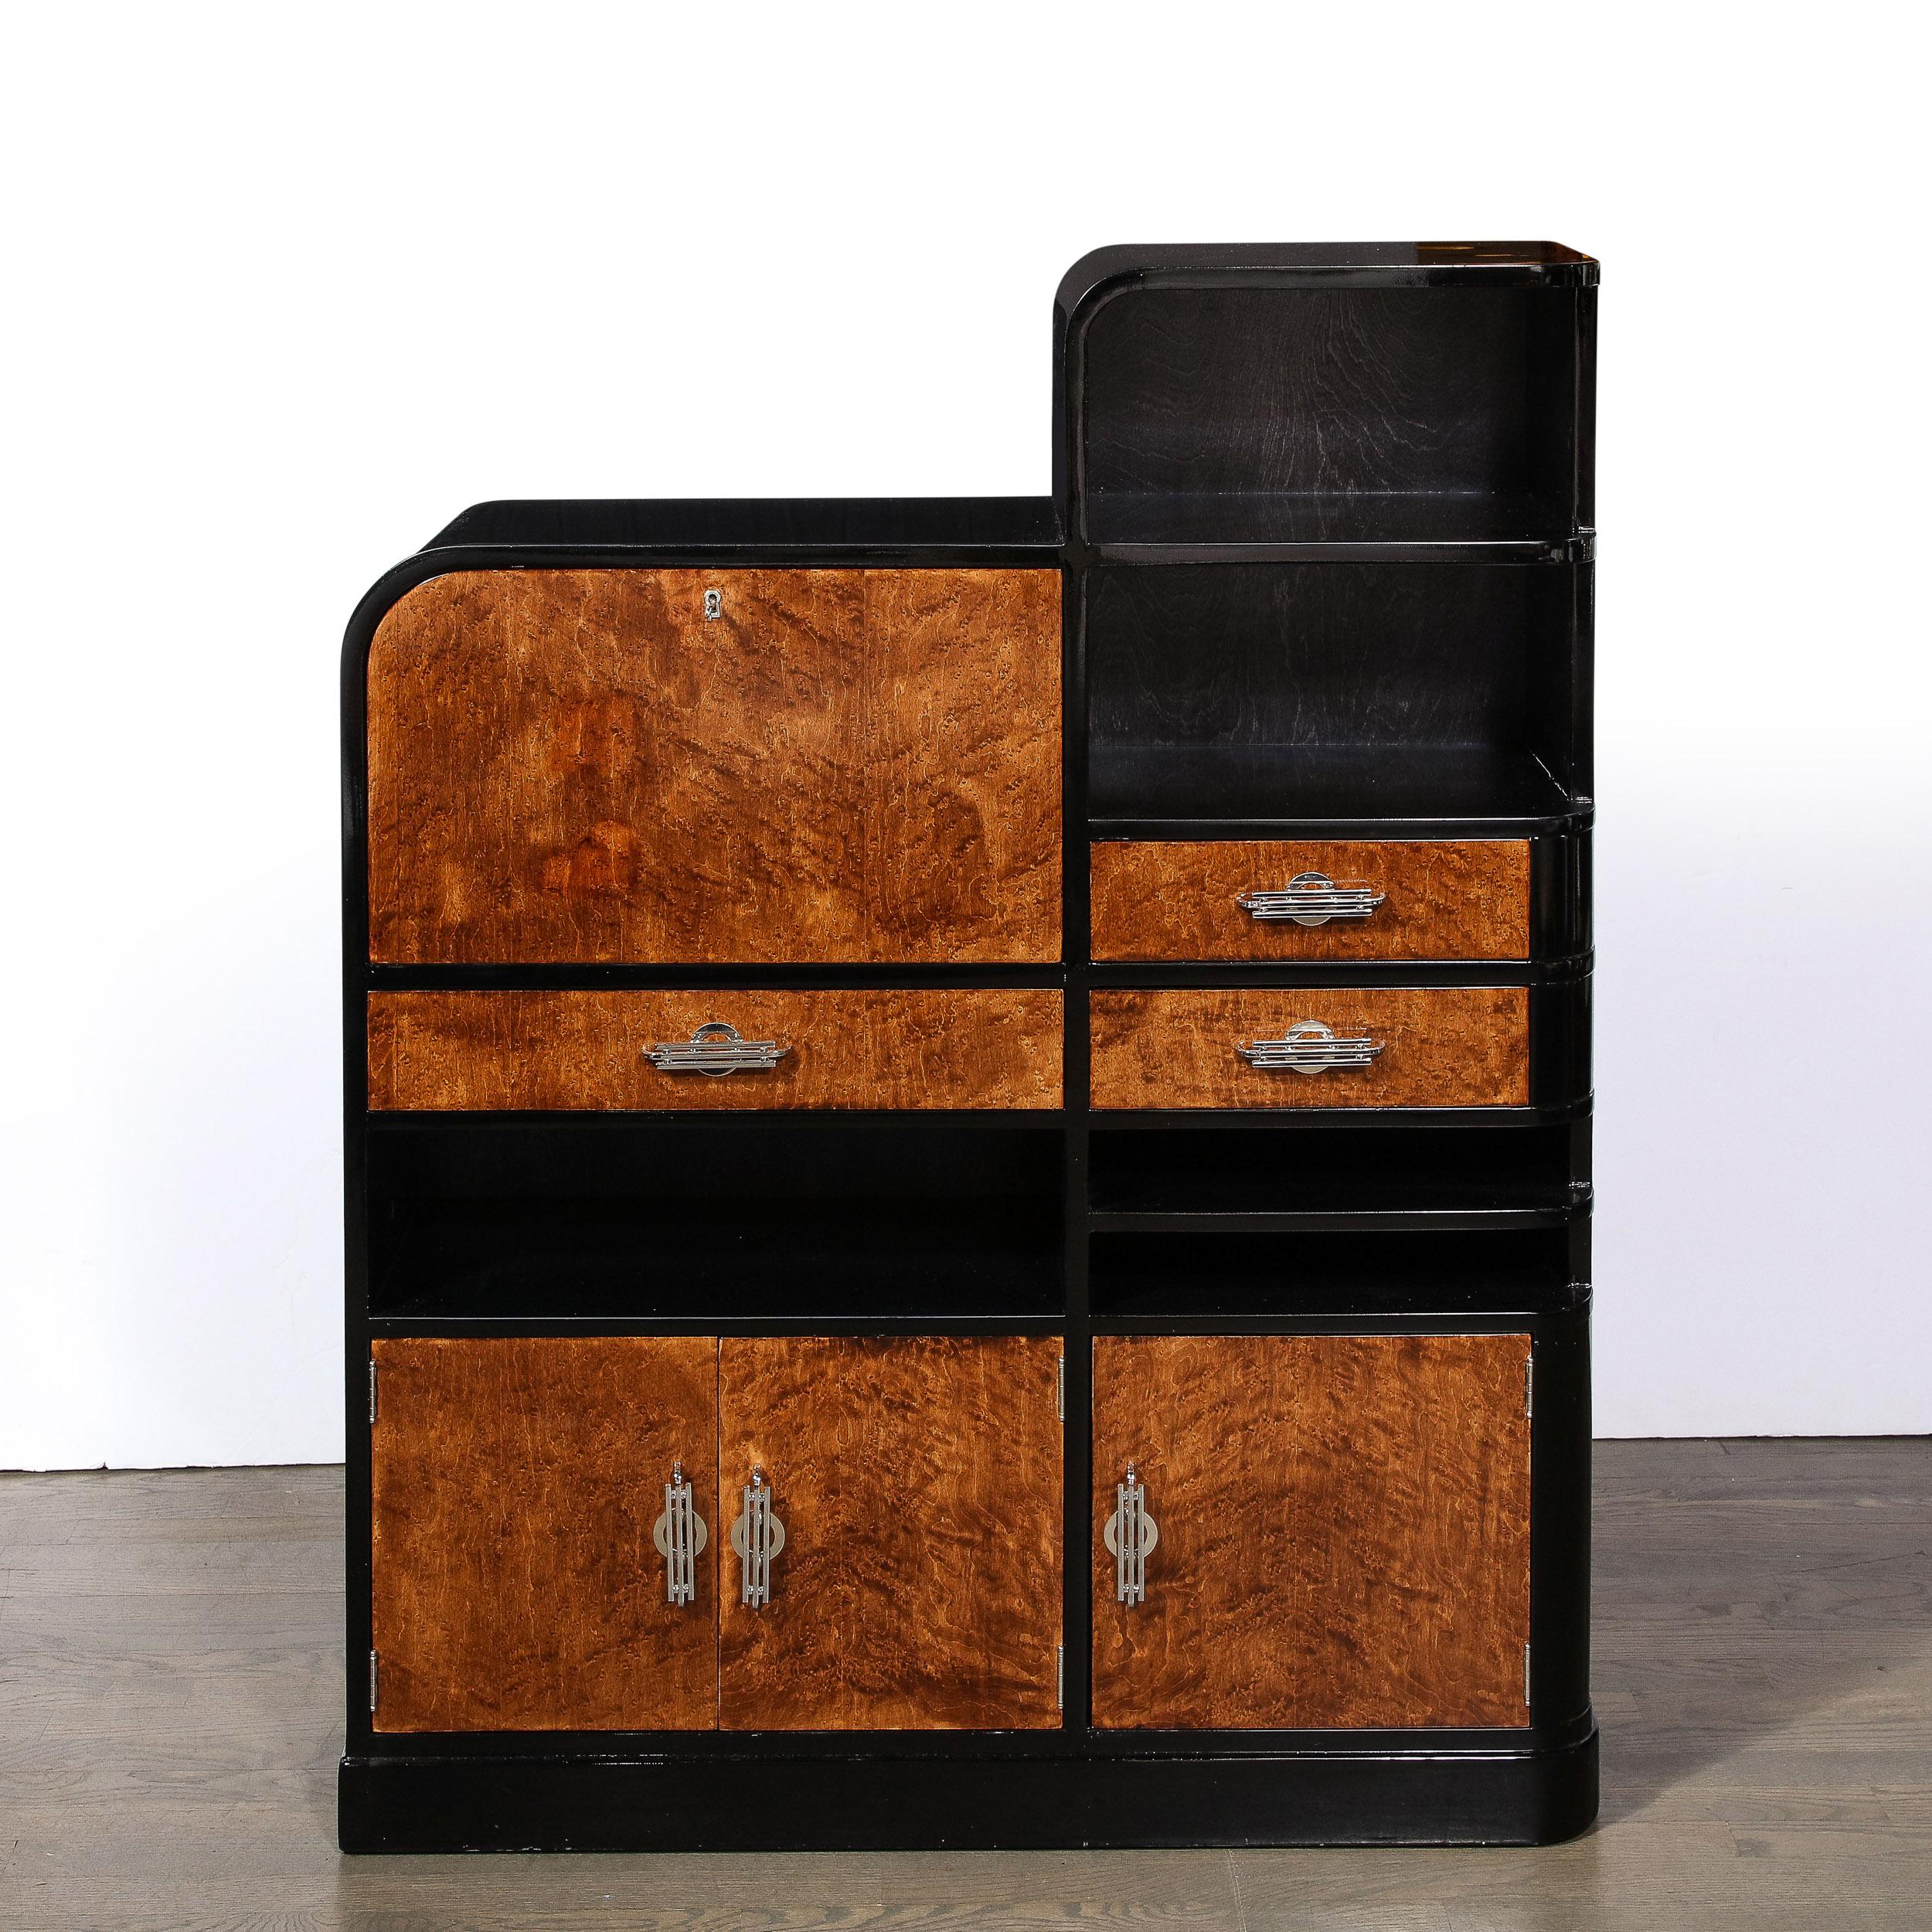 The Art Deco Secretary Bookcase is a beautiful example of American Streamline art and architecture, originating from the United States Circa 1935. The piece features elegant drawers, pulls and lines as well as wonderful materiality in the burled and